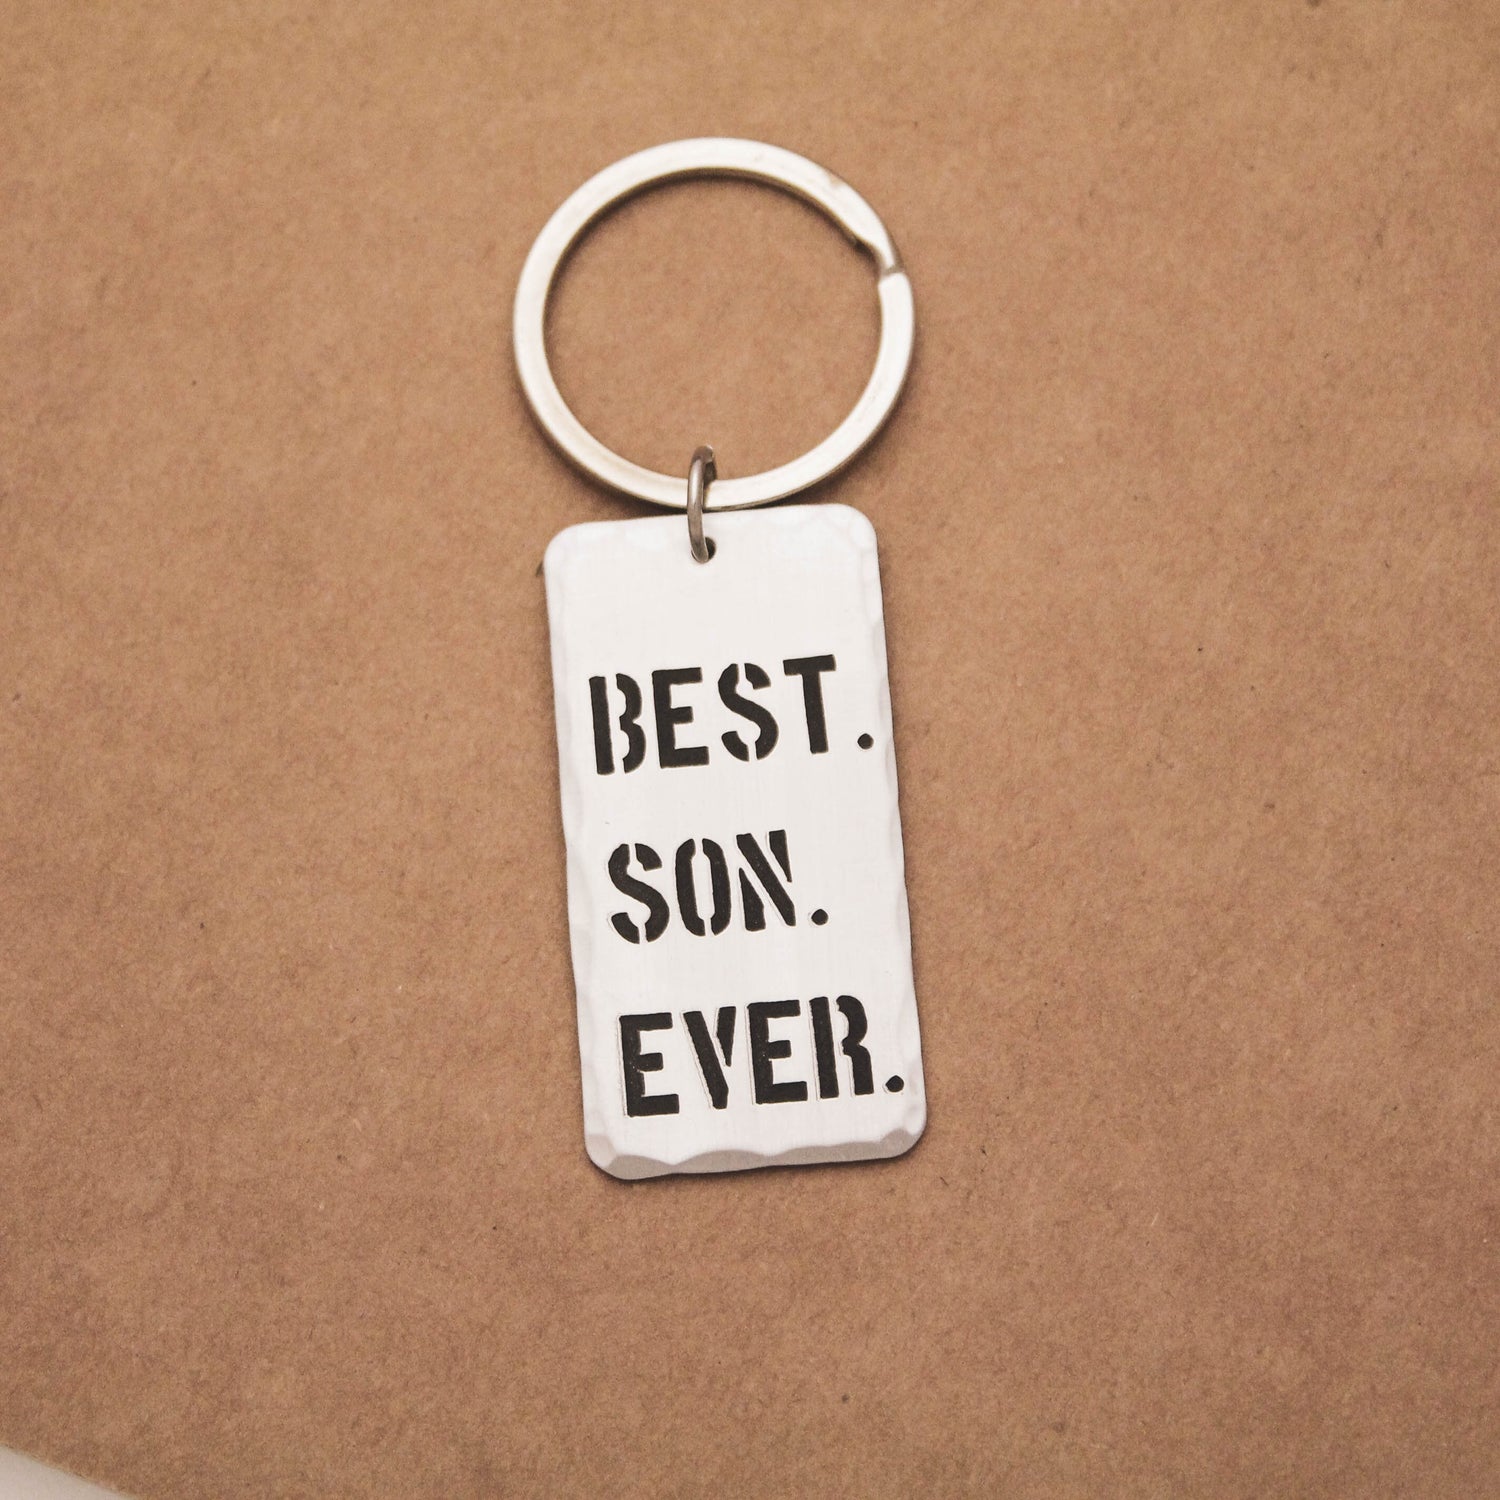 Best Son Ever Keychain, Personalized Key Chain, Gifts for Sons, Gifts for Him, Handstamped, Personalized Gift, Son Gift Keychain, Son Gift